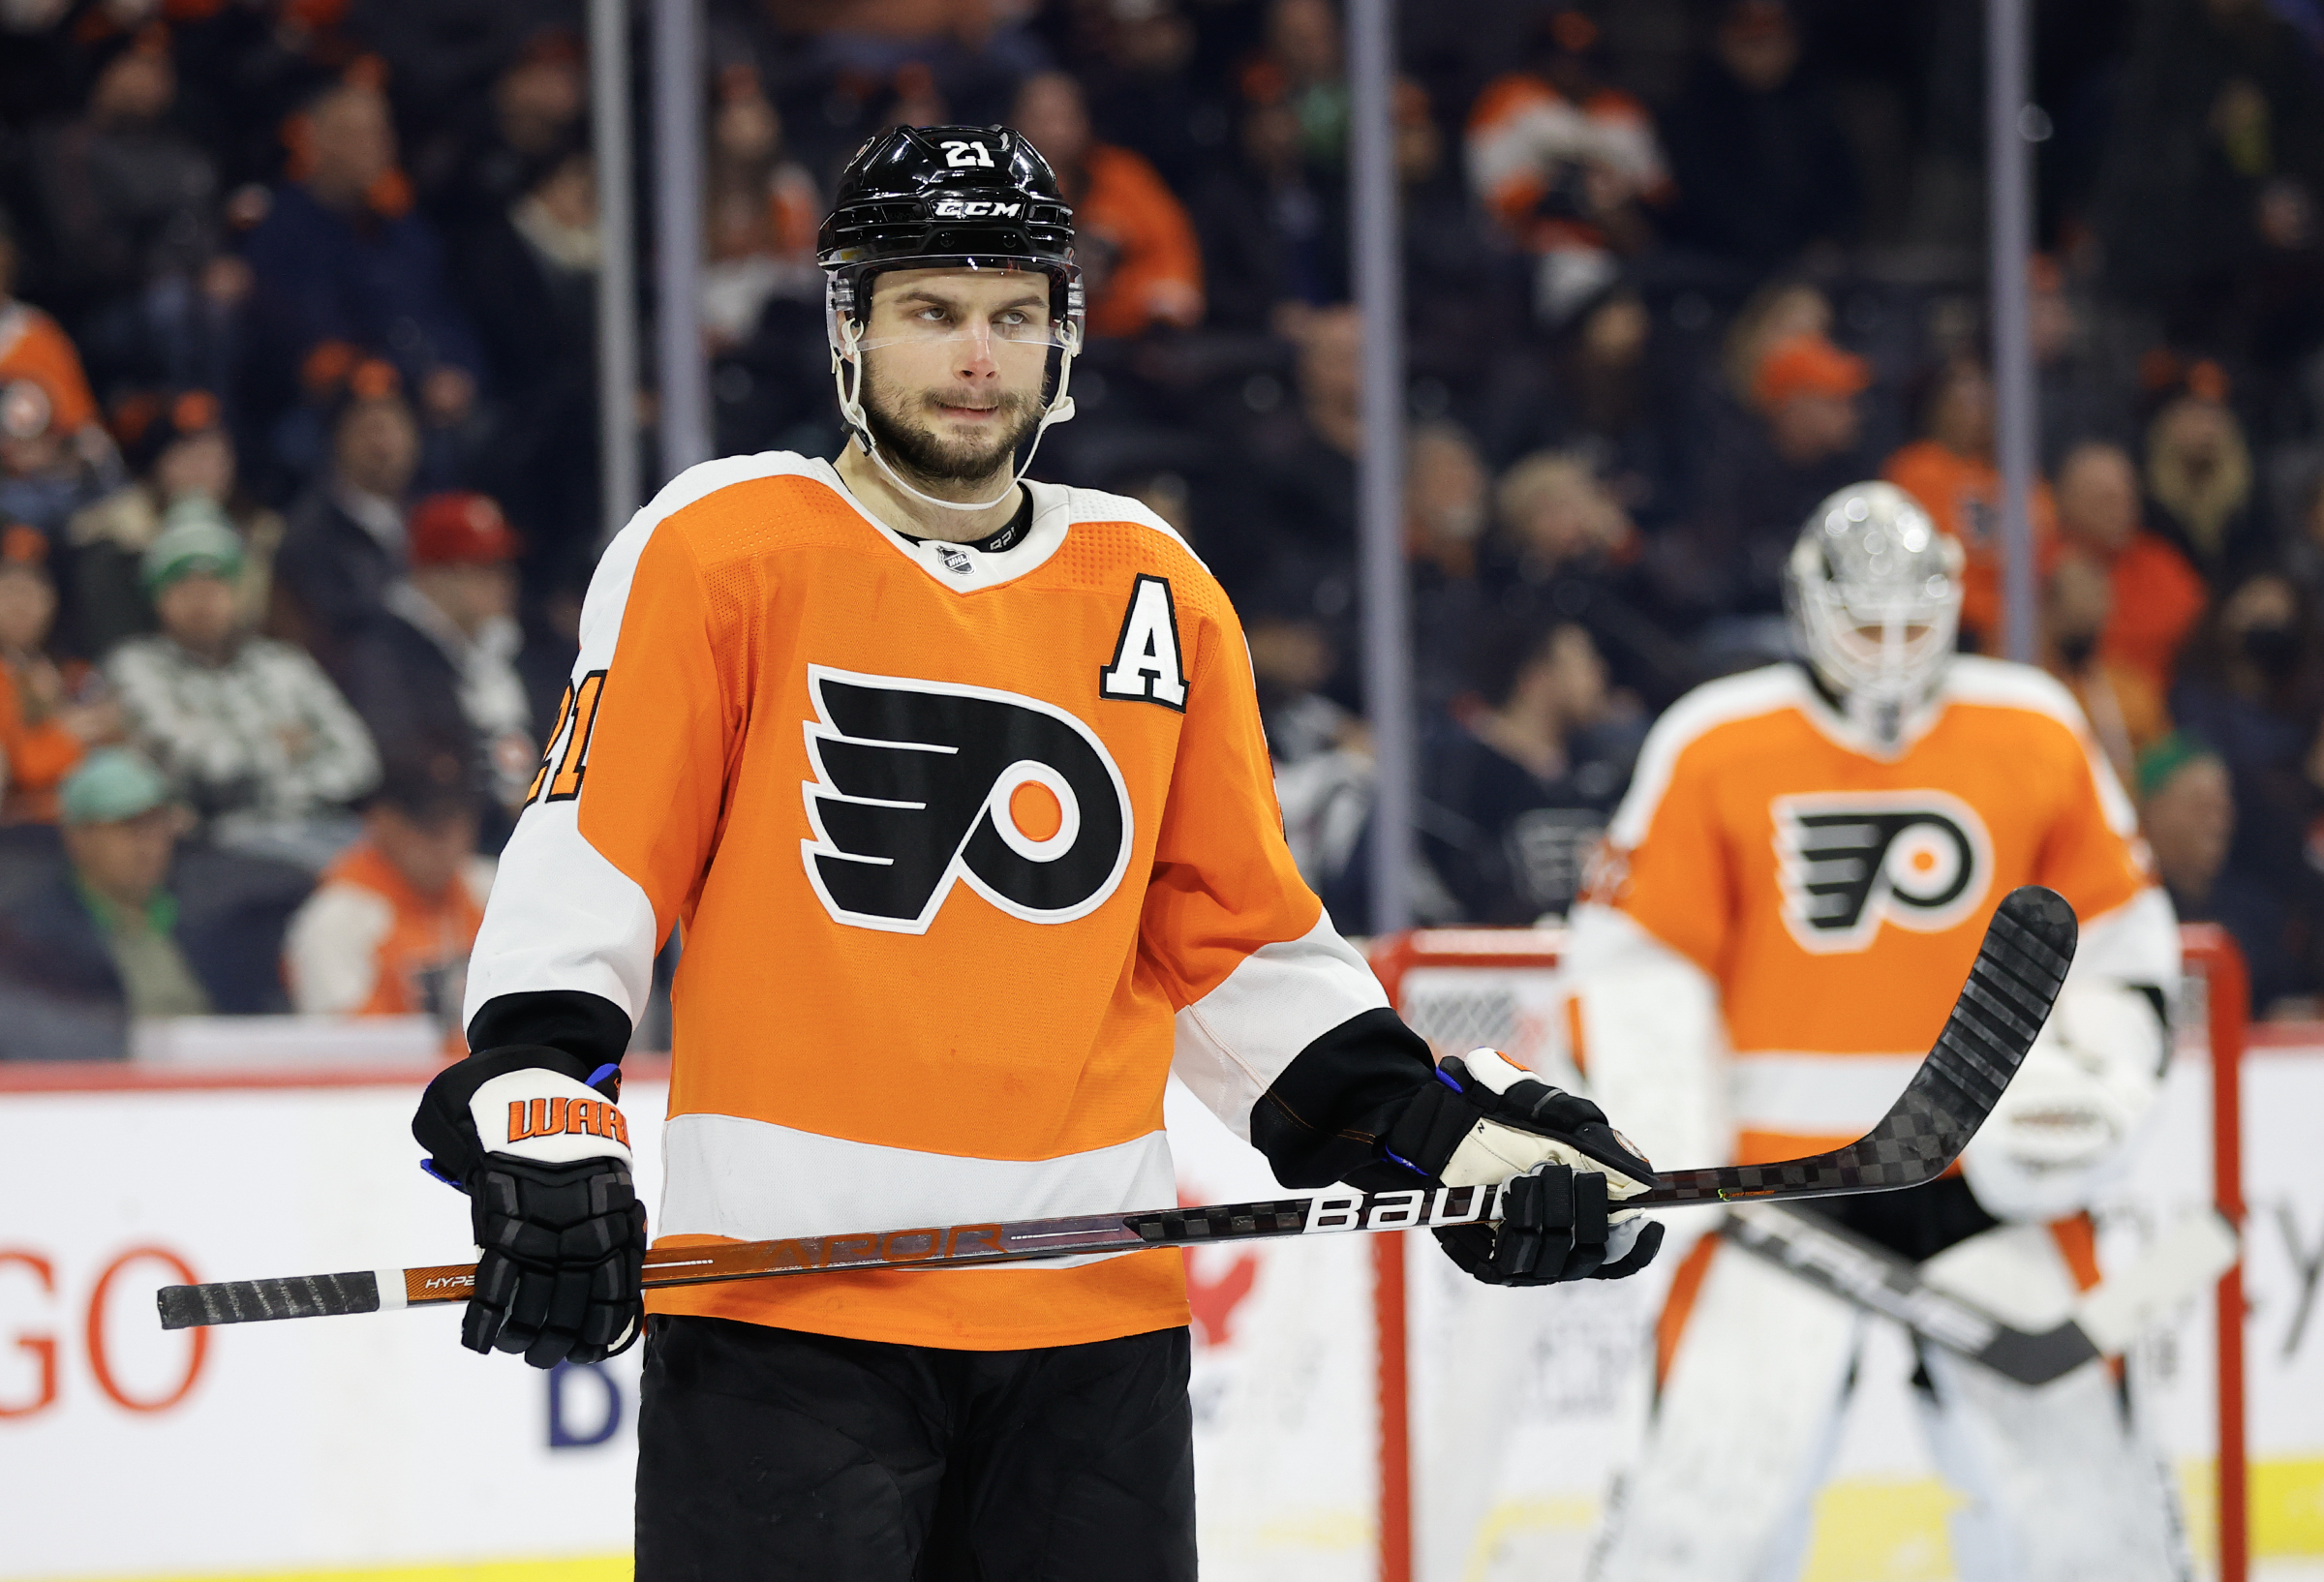 Laughton goal finally ends Flyers' winter nightmare – Delco Times